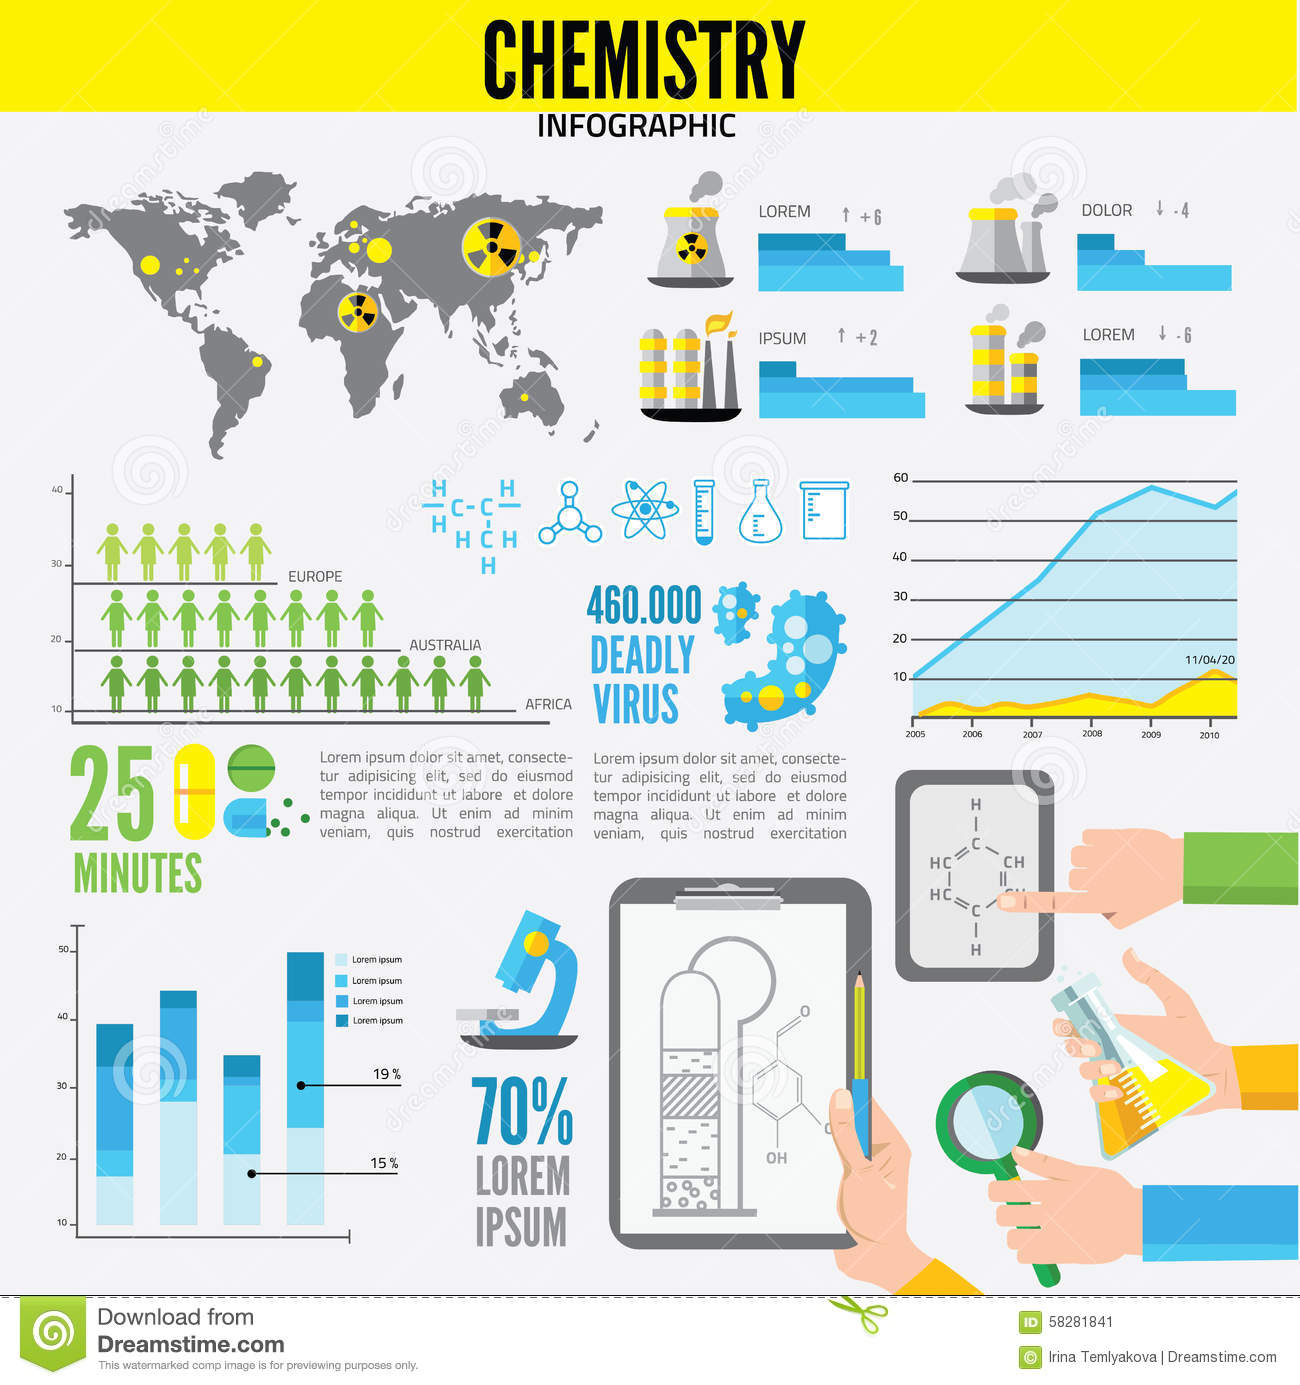 chemistry learning fascinating cool stuff organic chemistry infographic links ochem compound ...